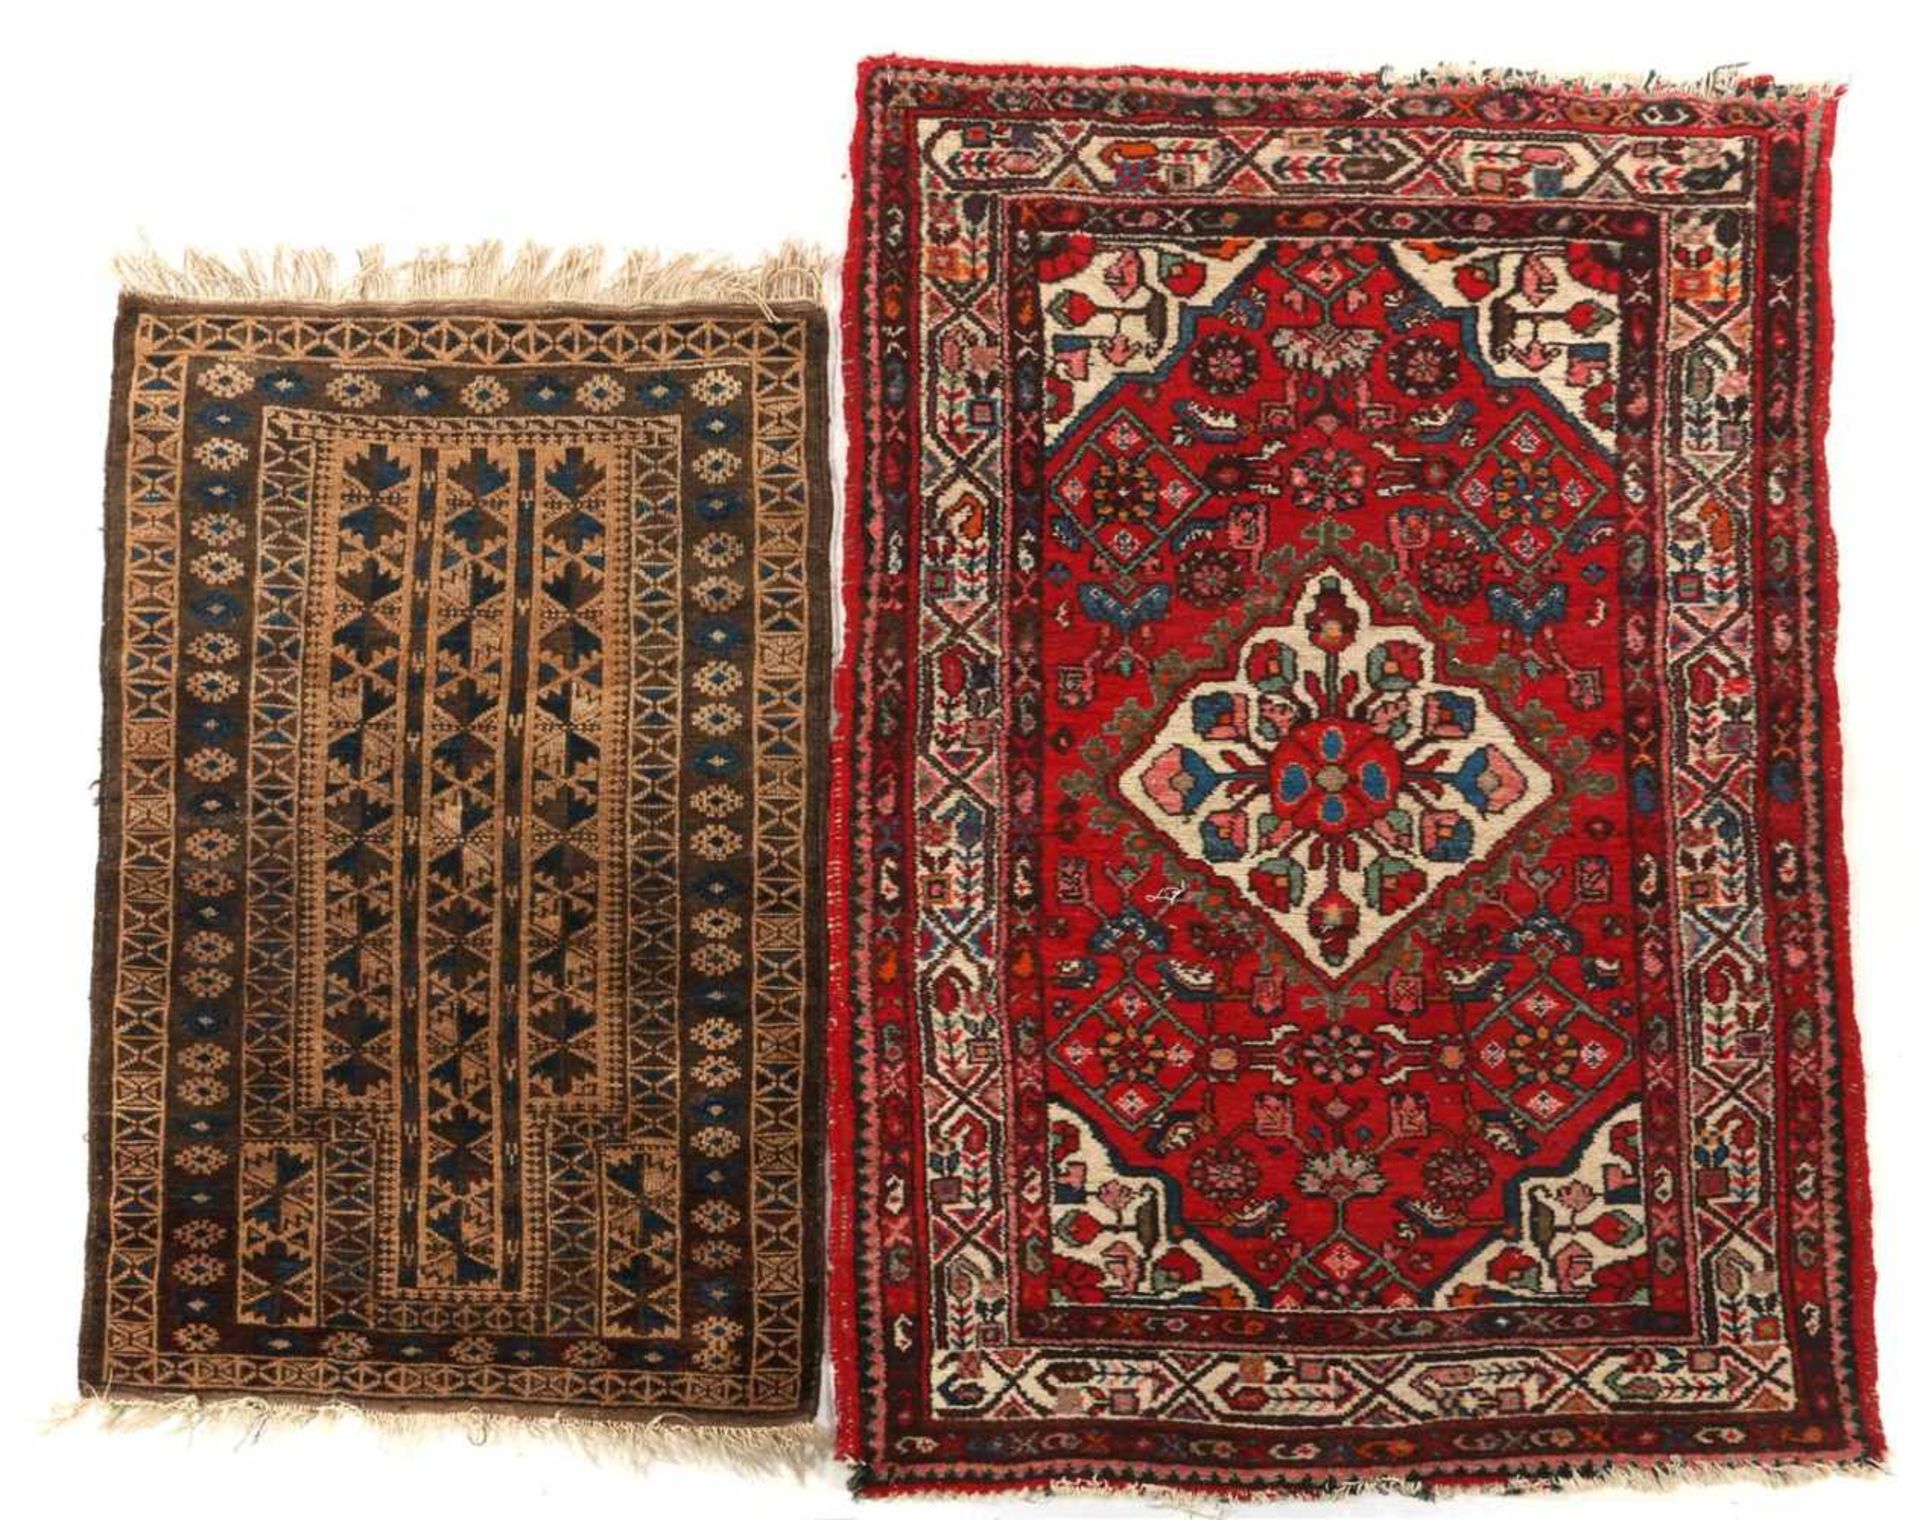 2 Oriental hand-knotted rugs 161x104 cm and 130x78 cm